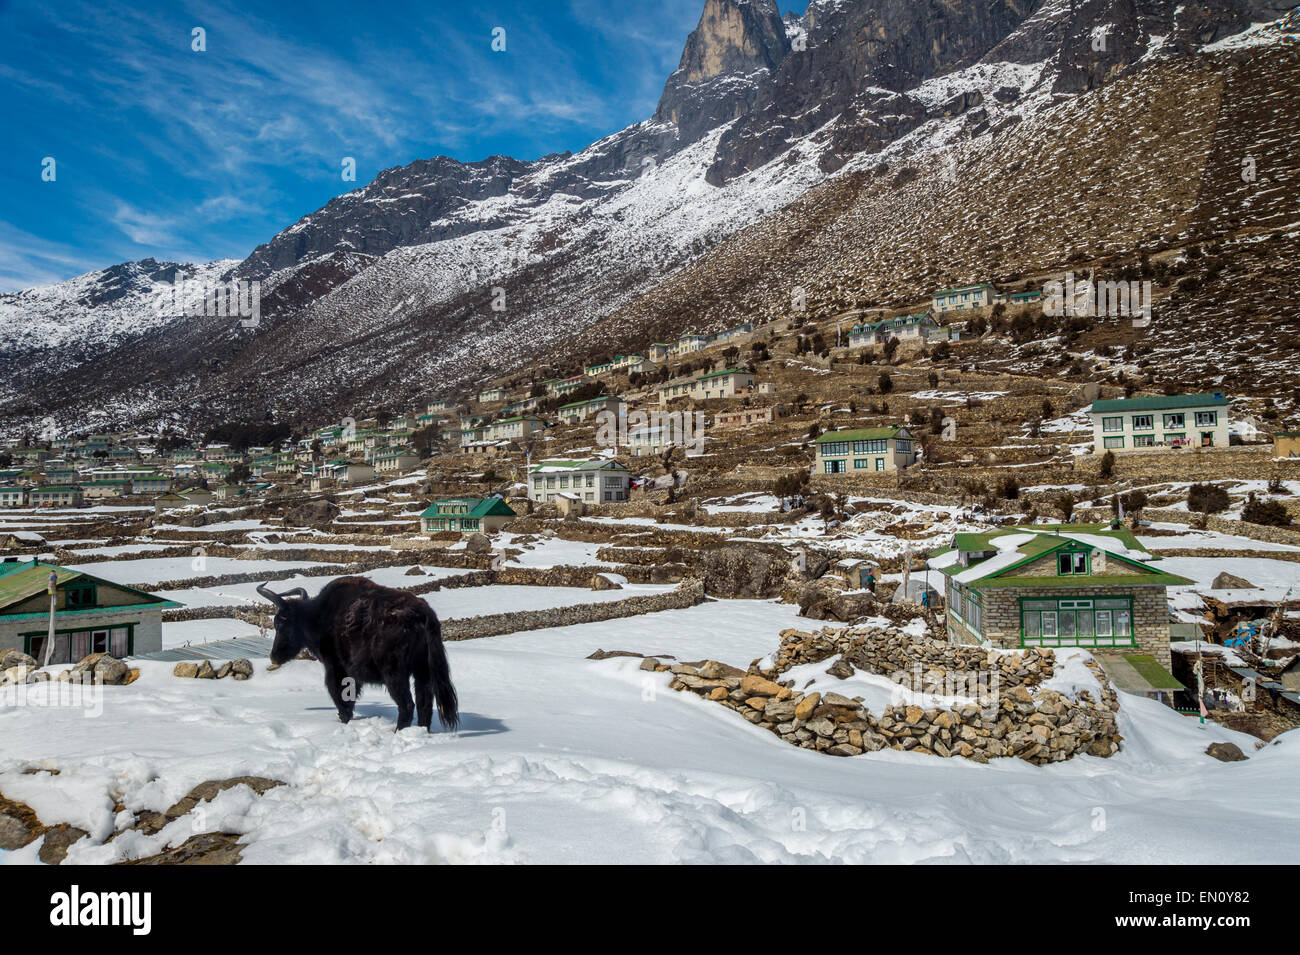 Khumjung village in Nepal with a yak in the foreground Stock Photo